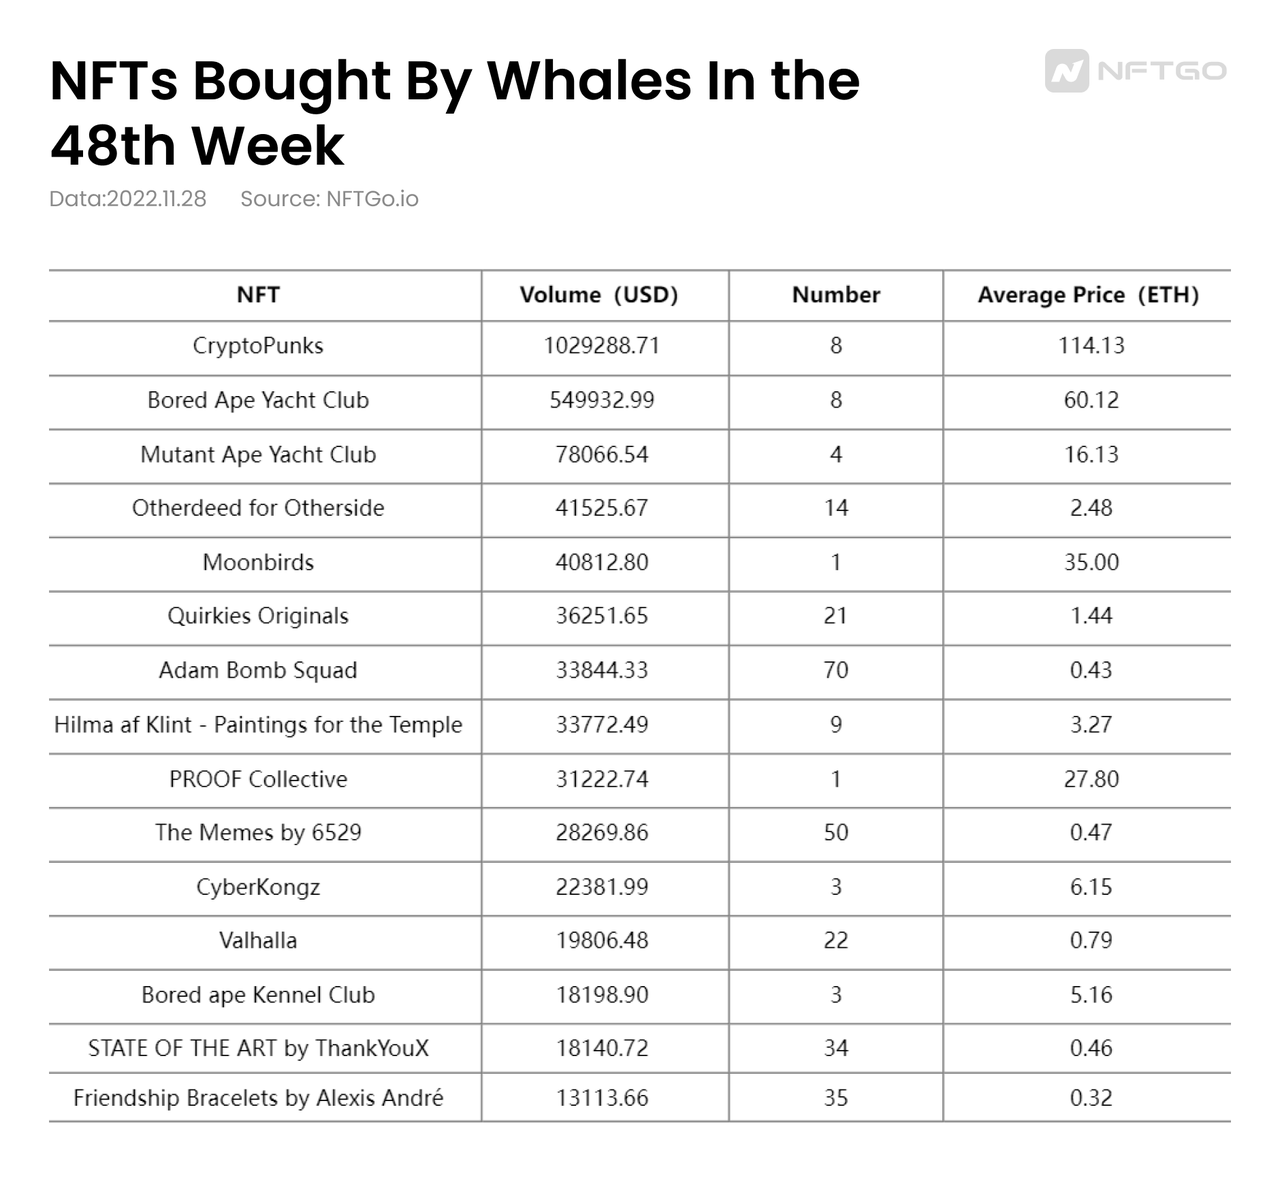 NFTs Bought by Whales (Source: NFTGo.io）